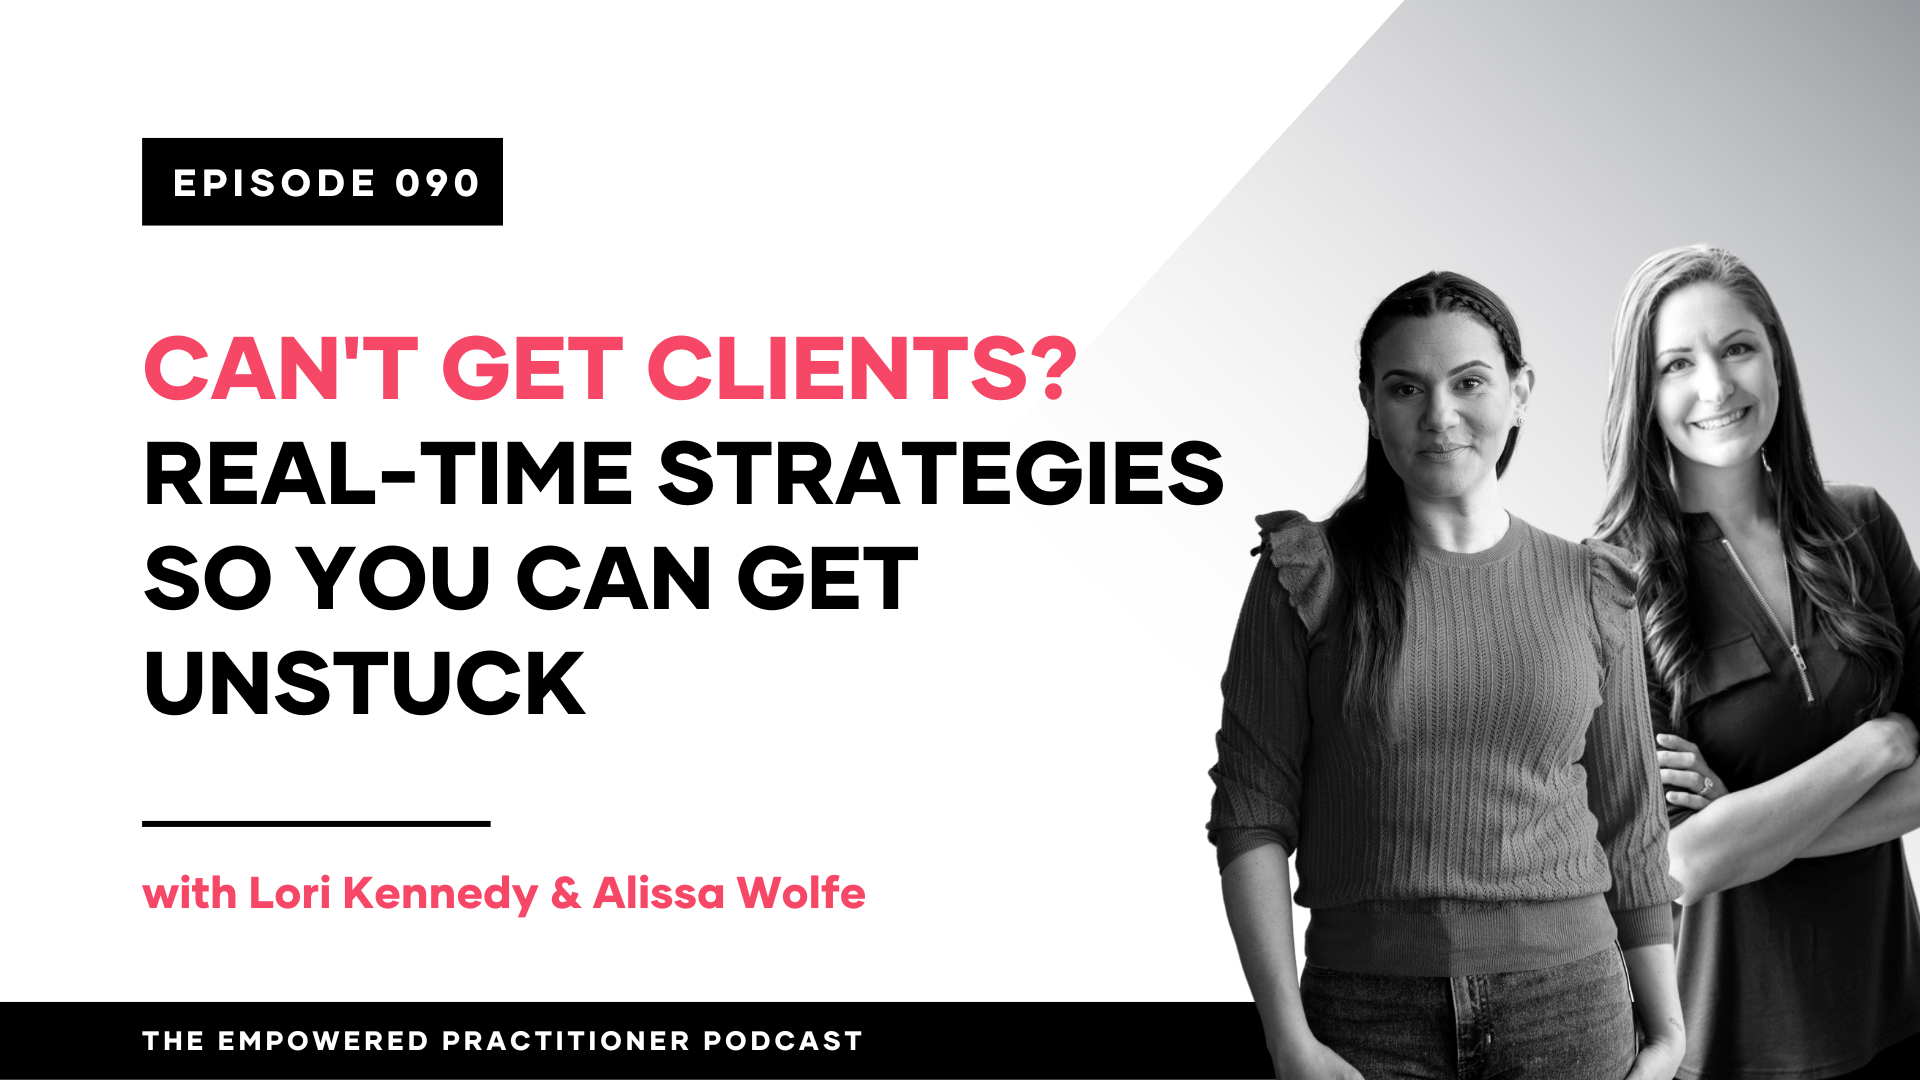 Can't Get Clients? Real-Time Strategies So You Can Get Unstuck